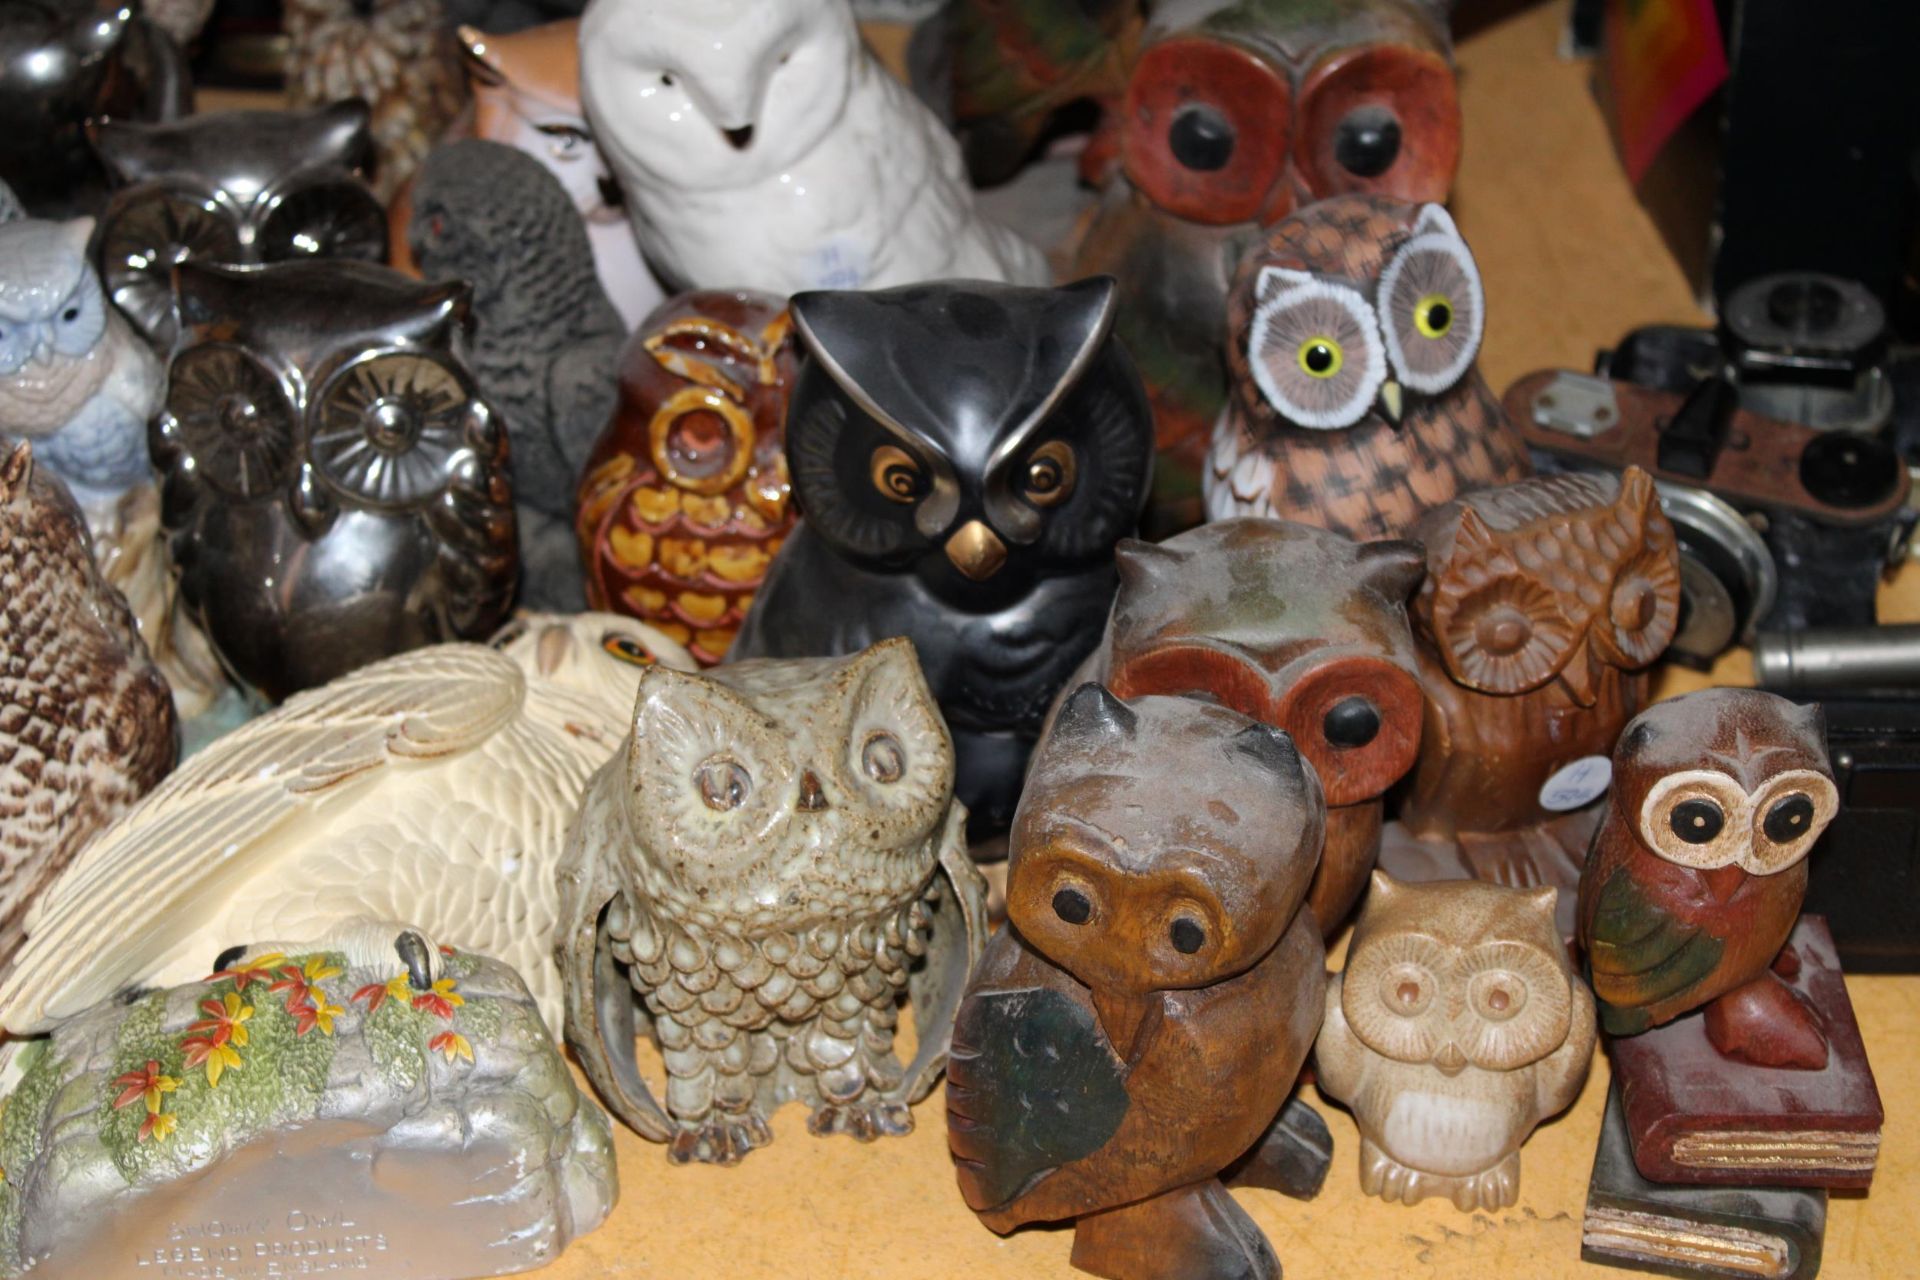 A COLLECTION OF 30+ OWL FIGURES, PLUS A TABLE LAMP WITH A DEER BASE AND A LARGE FIGURE OF A BOY - - Image 4 of 5